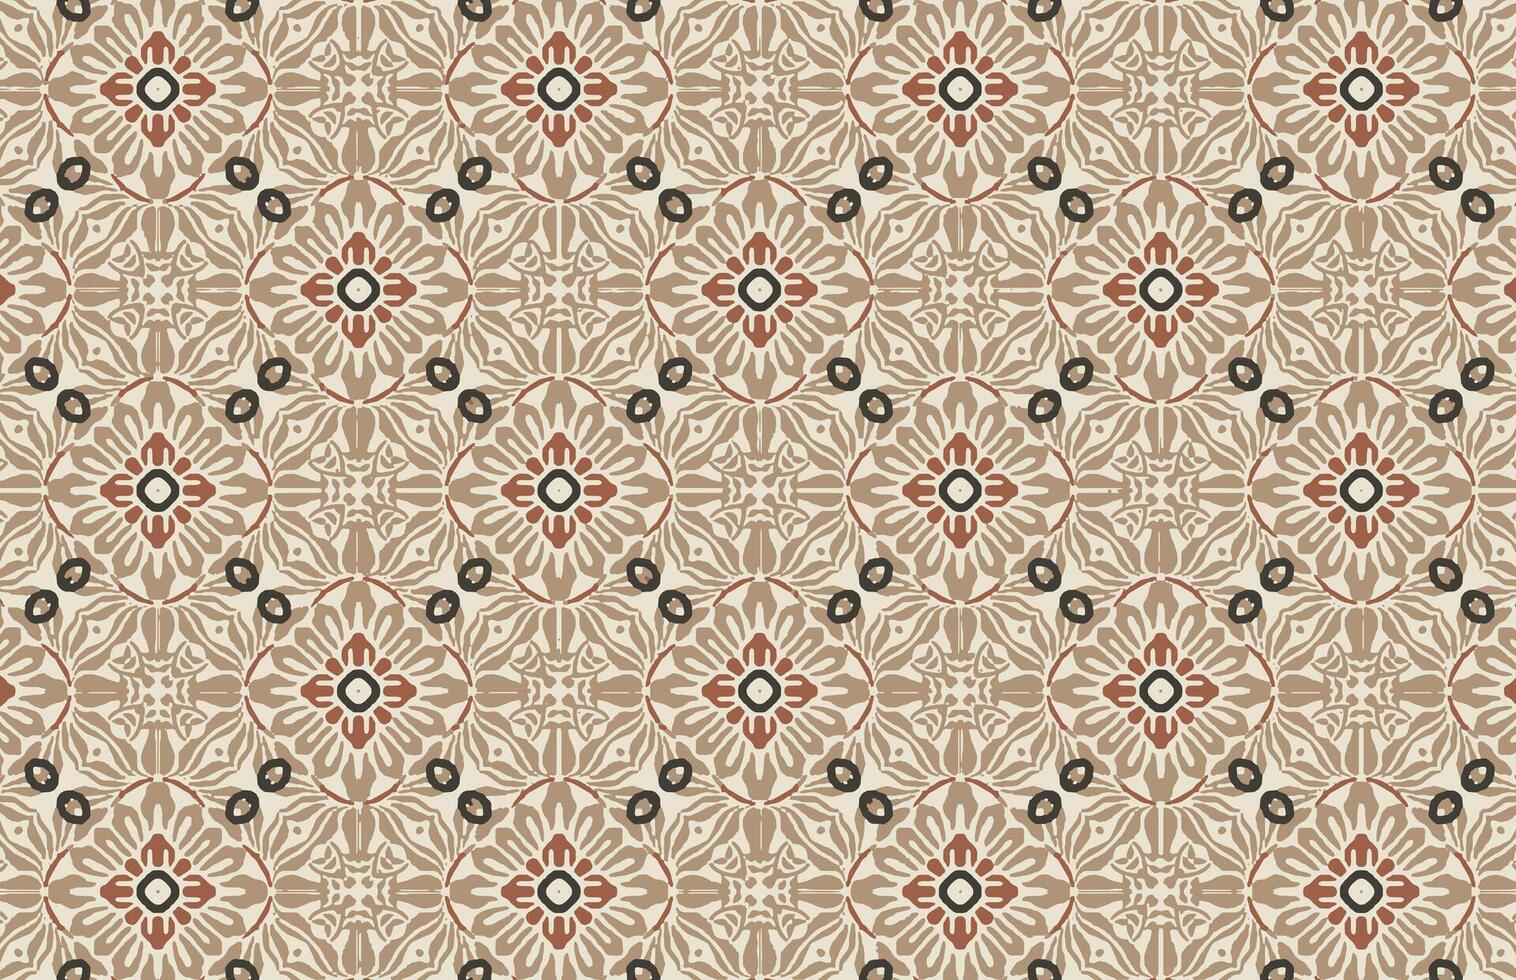 Brown and black grunge fabric design pattern vector